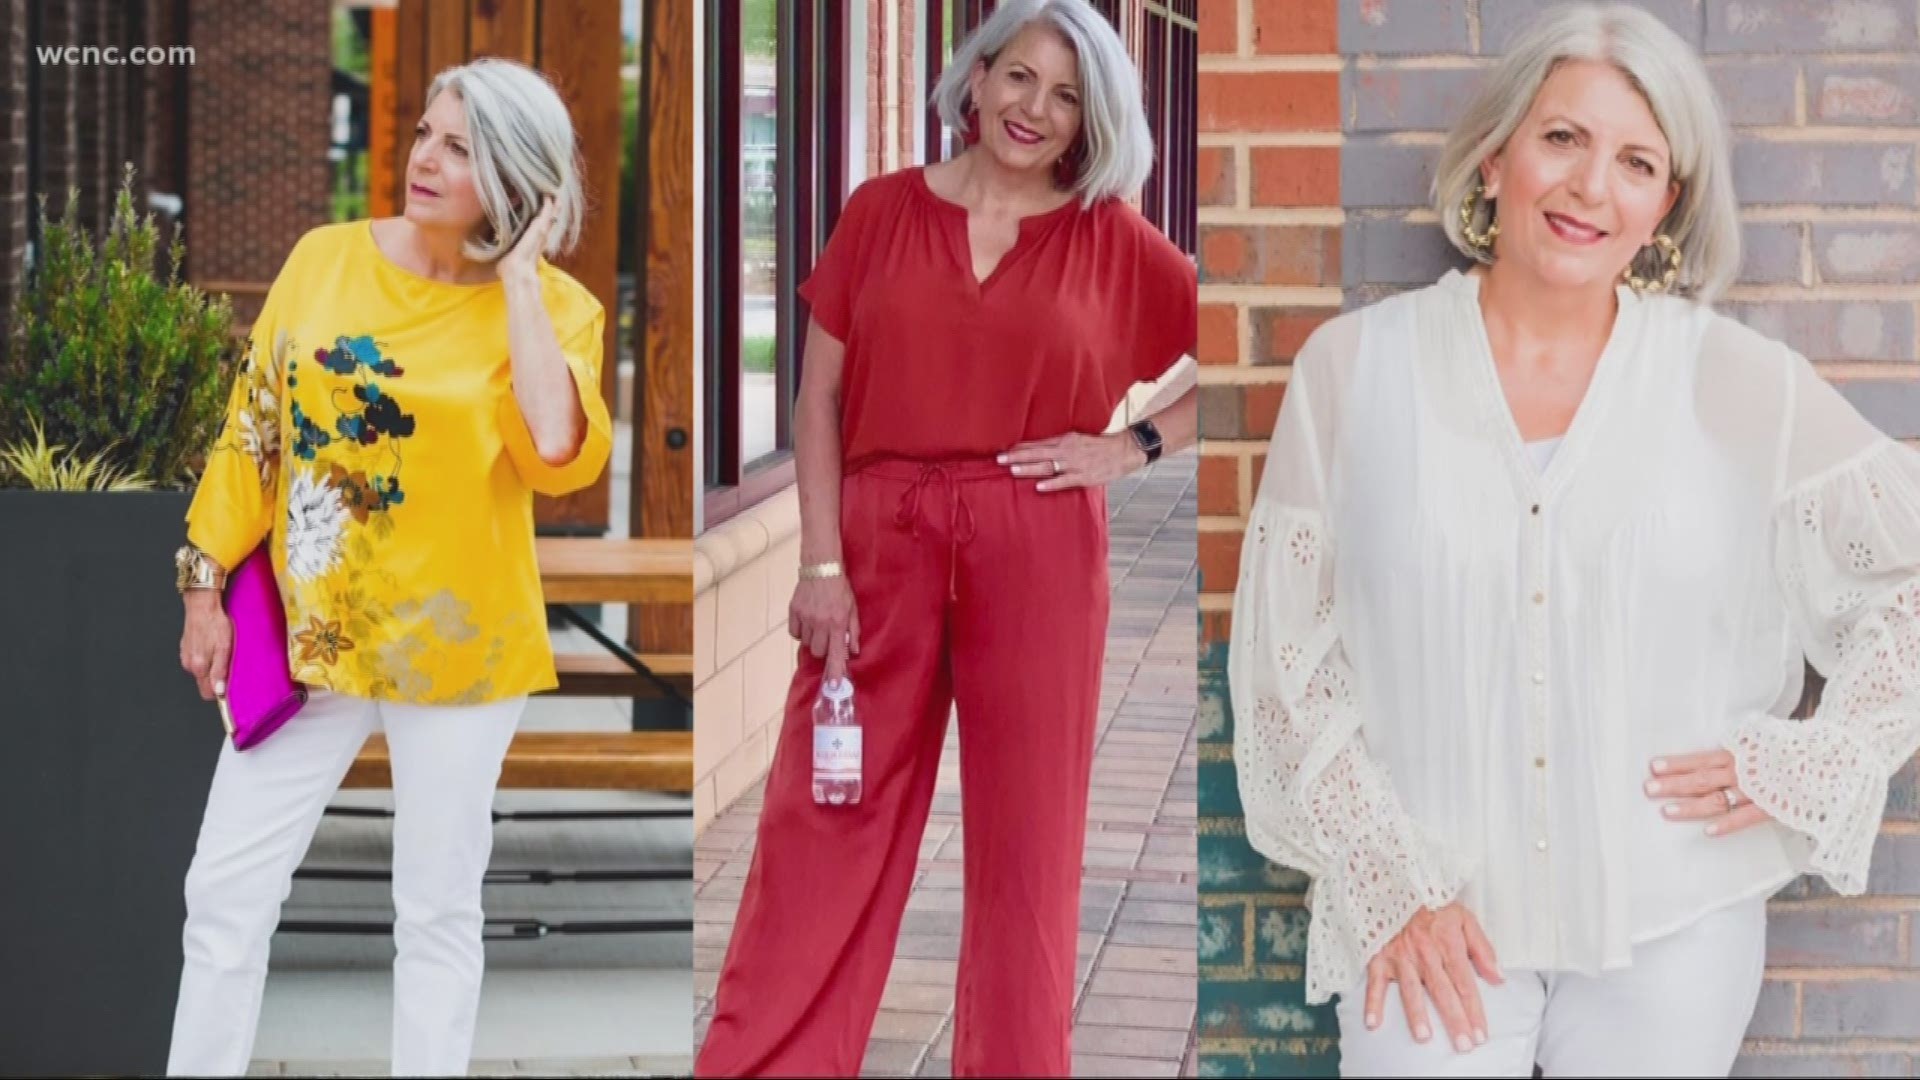 Social media influencers are everywhere, but when you think about them, a 61-year-old grandma probably doesn't come to mind!